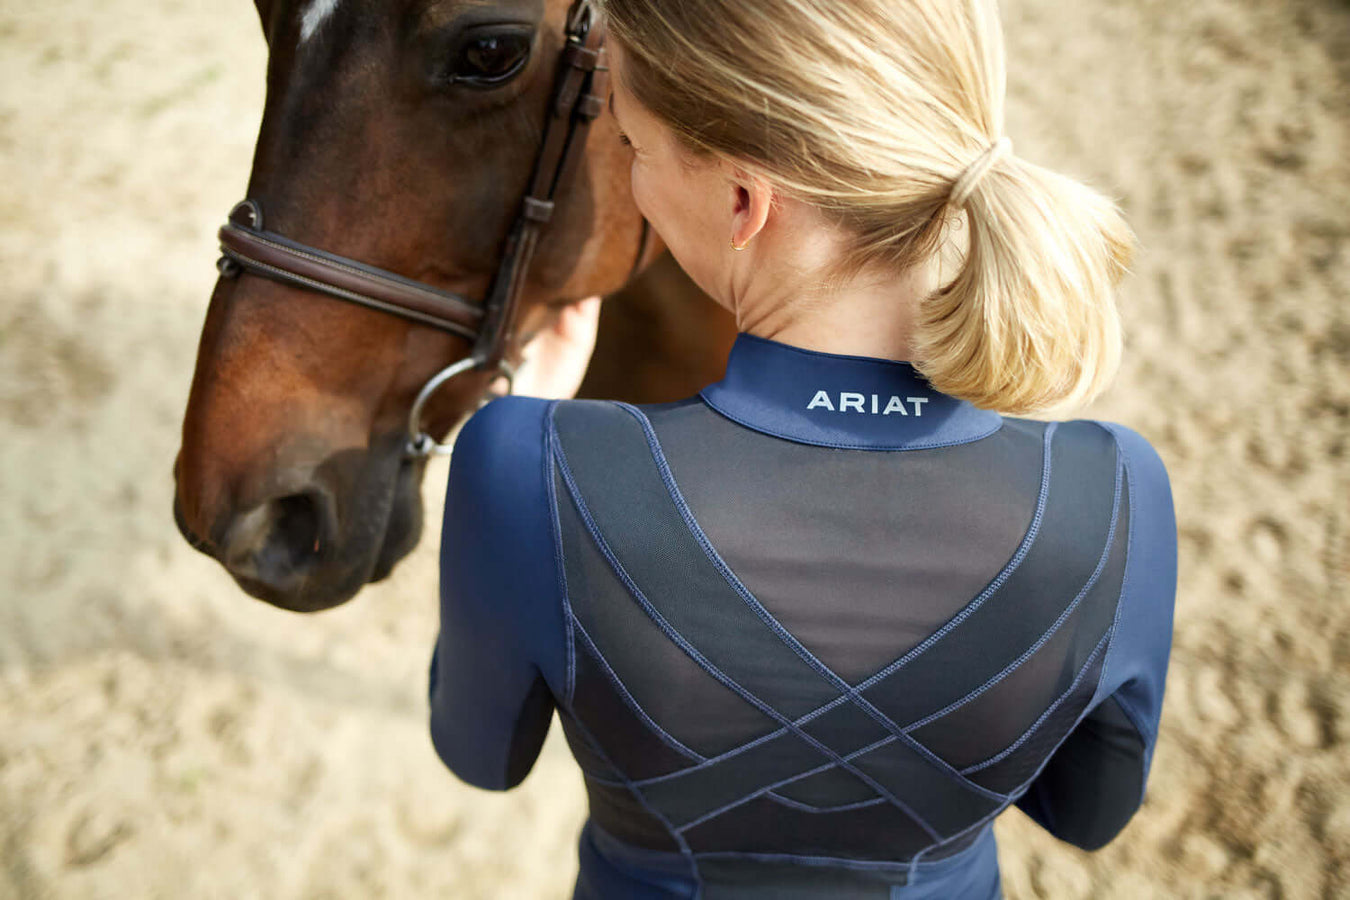 Ariat Sunstoppers Baselayers and Competition Clothing and Ariat Footwear Riding Boots | North Devon Stockist Barnstaple Equestrian Supplies